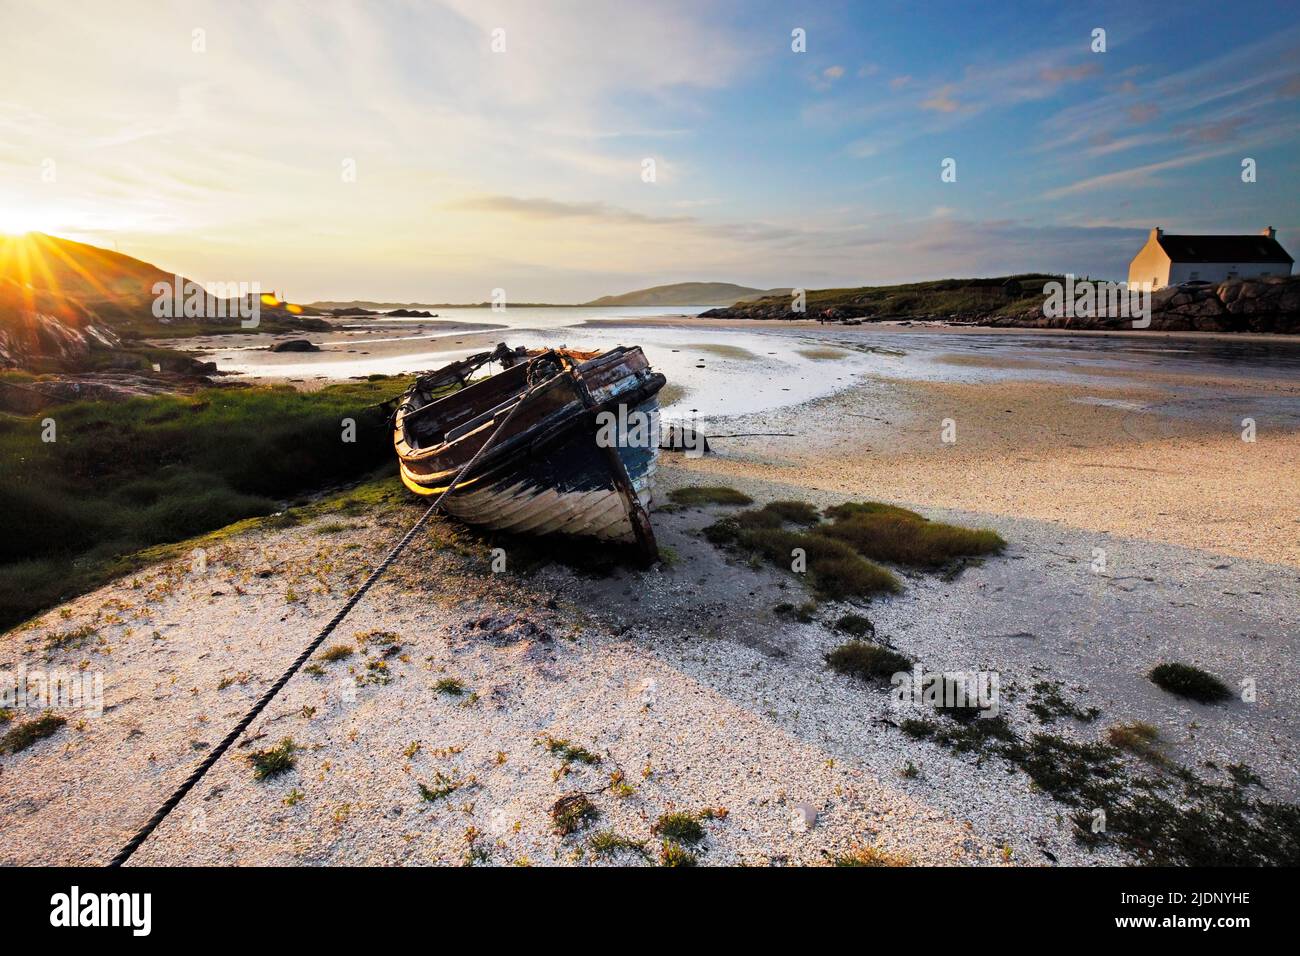 The Cockle Strand, Traigh Mhor Beach, Isle of Barra, Outer Hebrides, Scotland Stock Photo